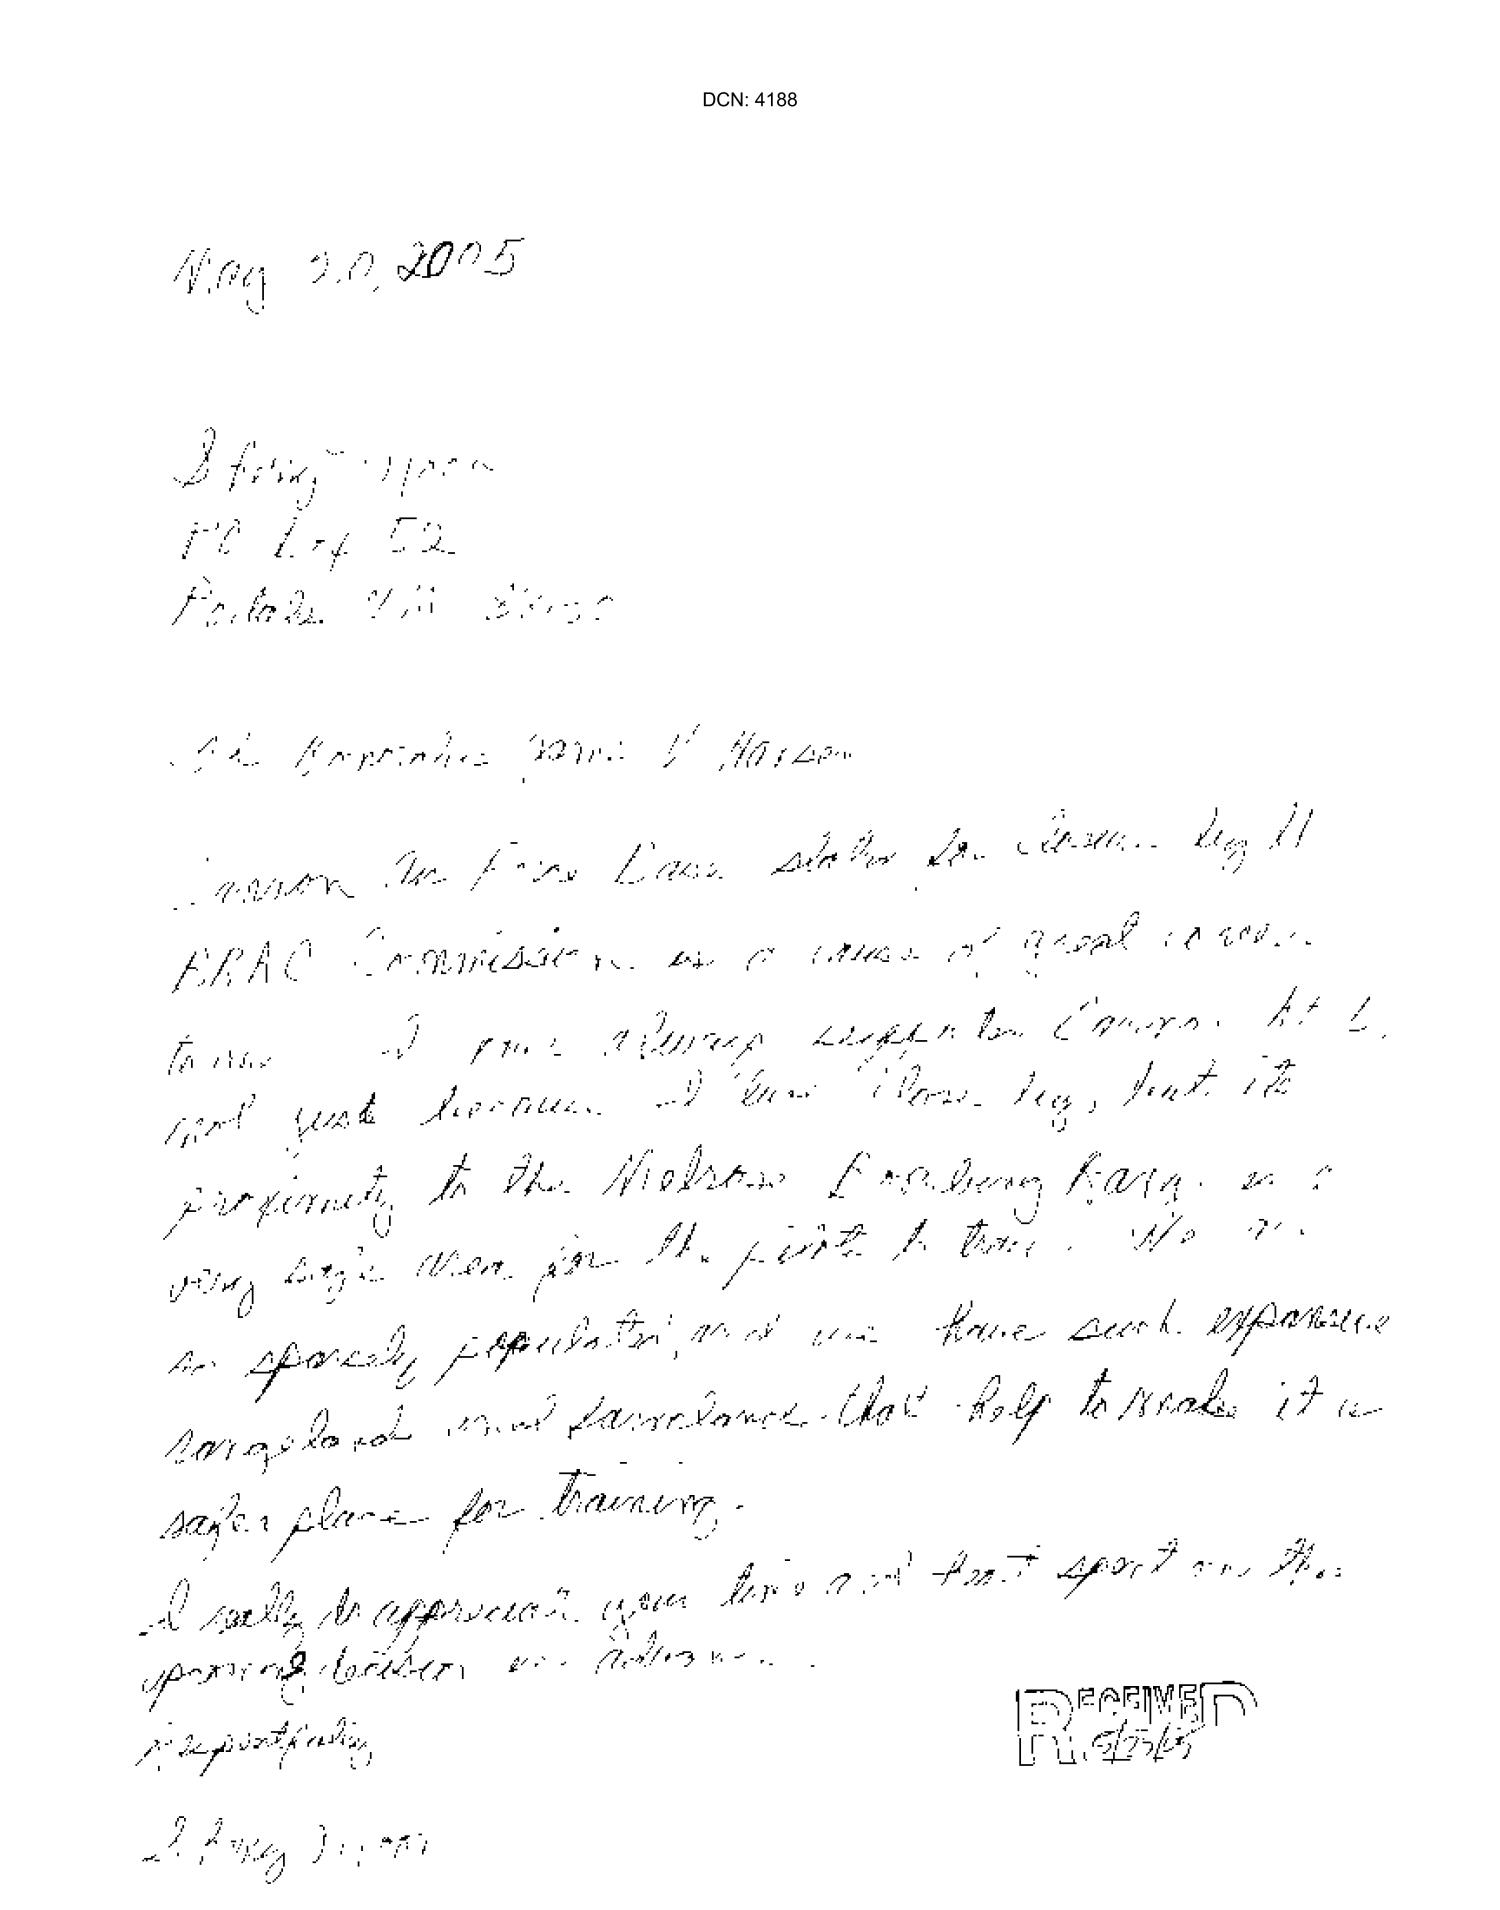 Letters from Sherry Moon to the Commission dtd 20 May 2005
                                                
                                                    [Sequence #]: 4 of 5
                                                